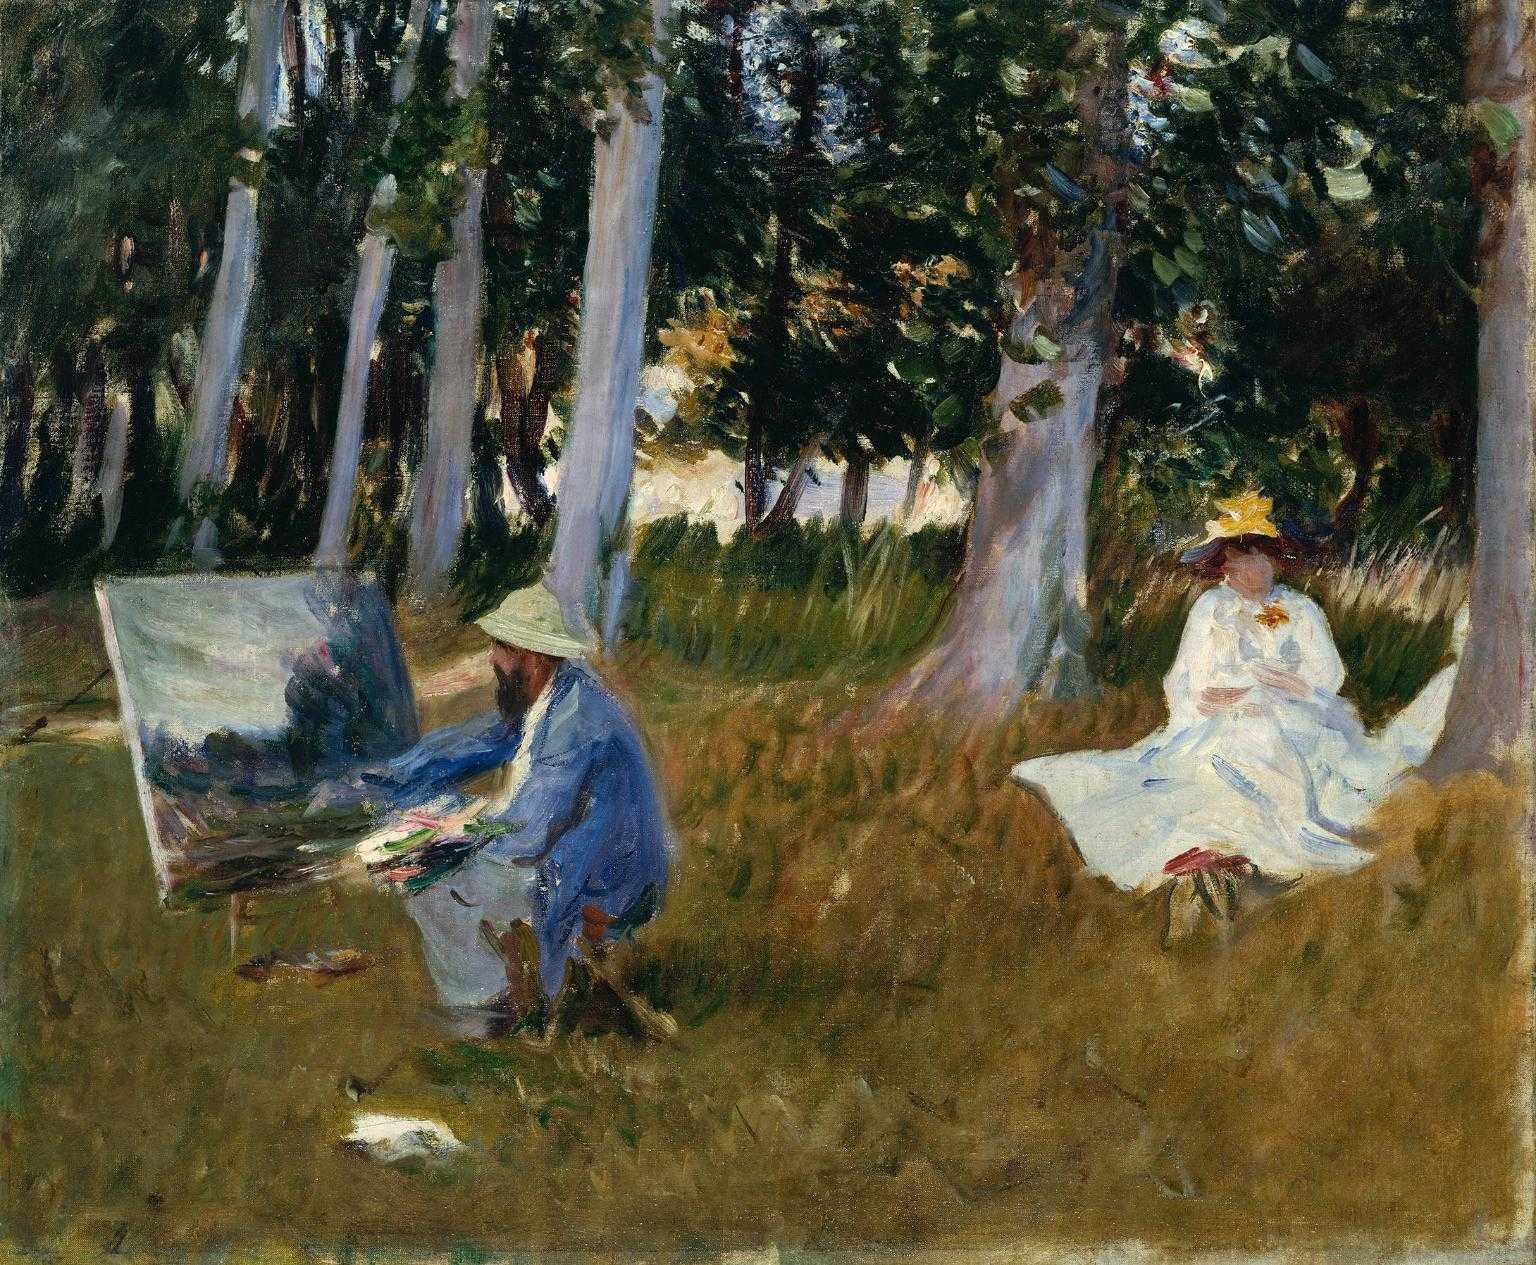 Find out more about John Singer Sargent - Claude Monet Painting by the Edge of a Wood